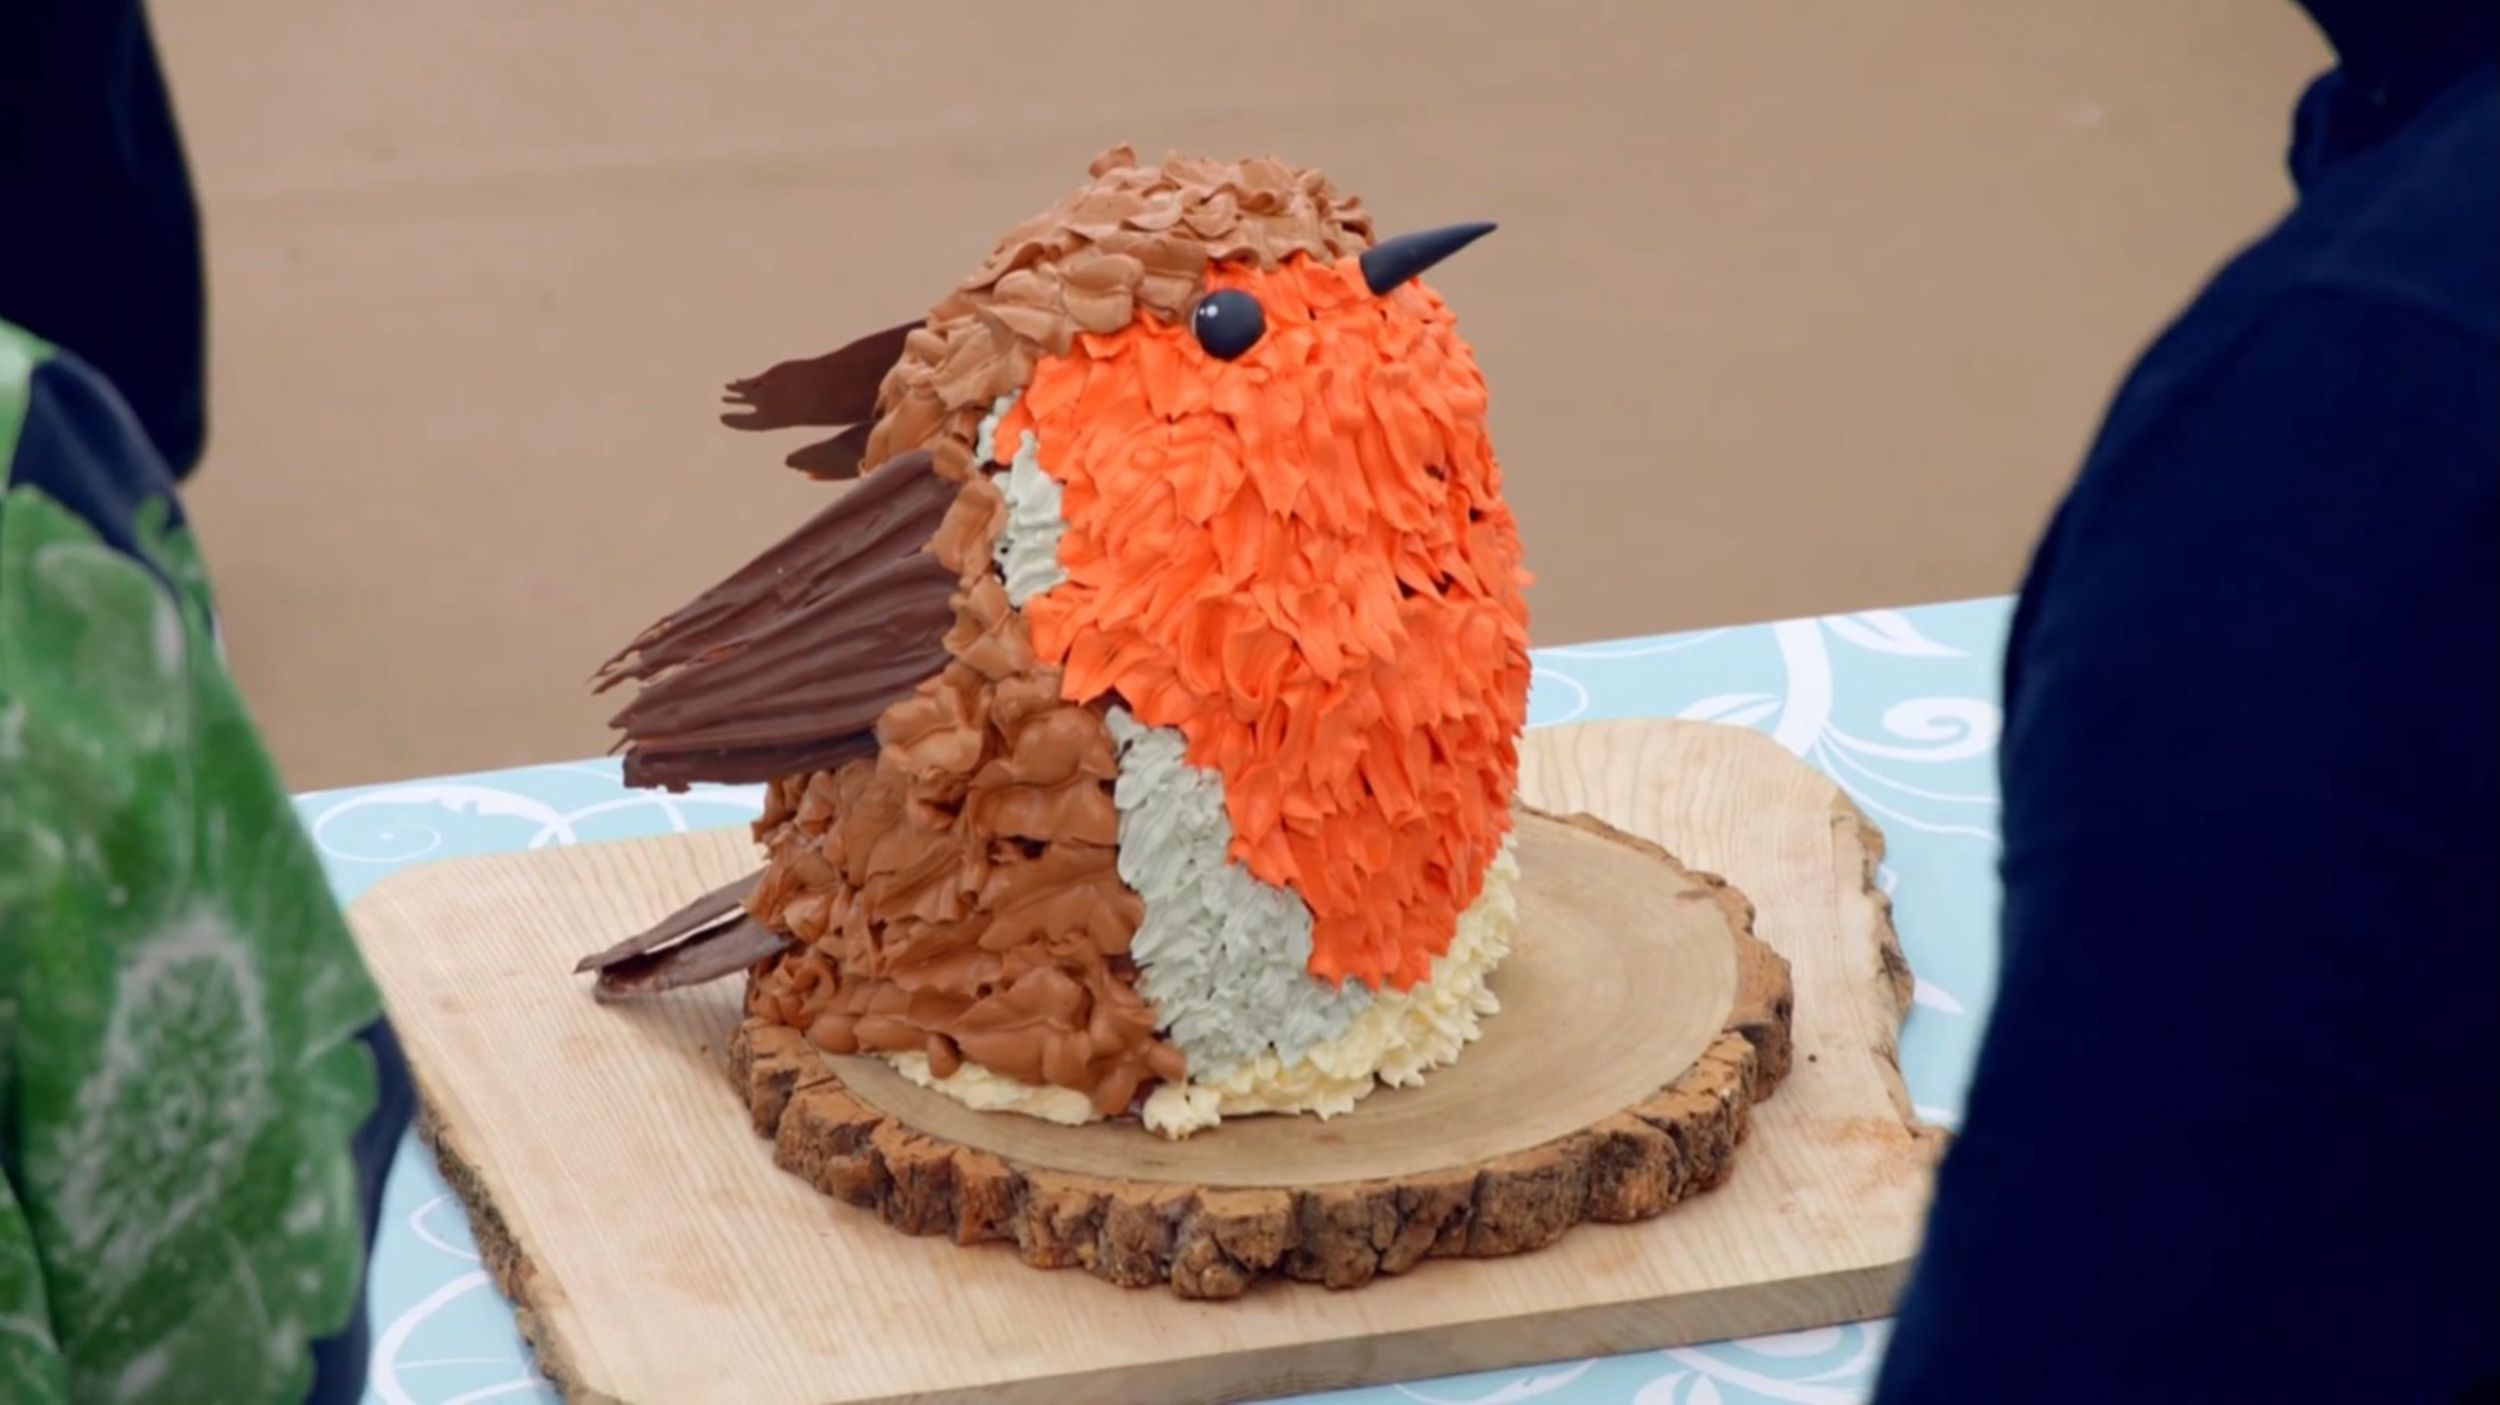 Tasha's Showstopper Robin Cake from The Great British Baking Show's Cake Week